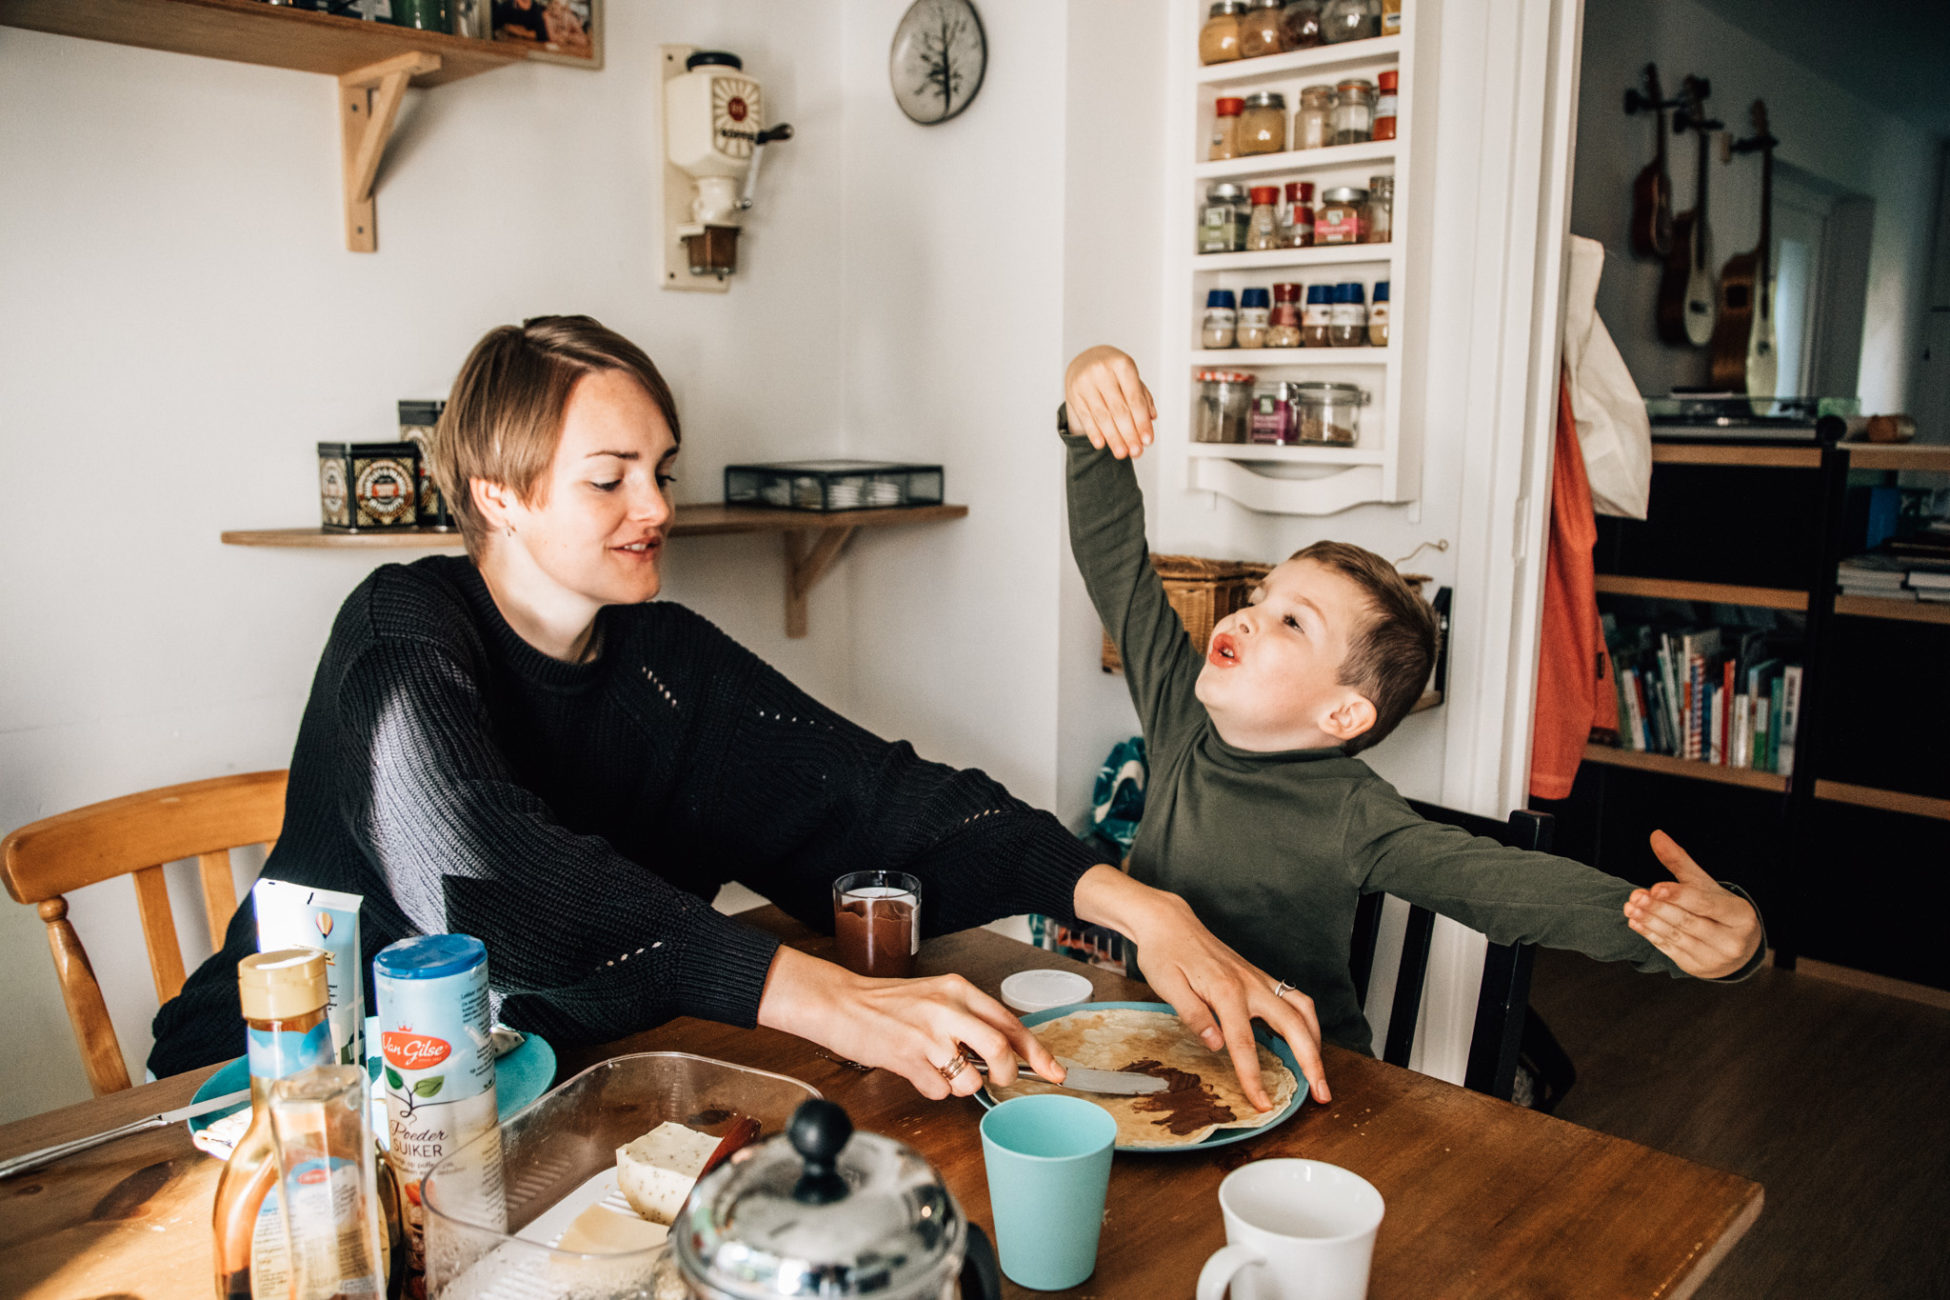 Things you can do during your family photoshoot: to have breakfast together: Mom and child having breakfast together in the kitchen. Kid has arms wide open, like talking of a big explosion while his mom is spreading nutella on his pannenkoek